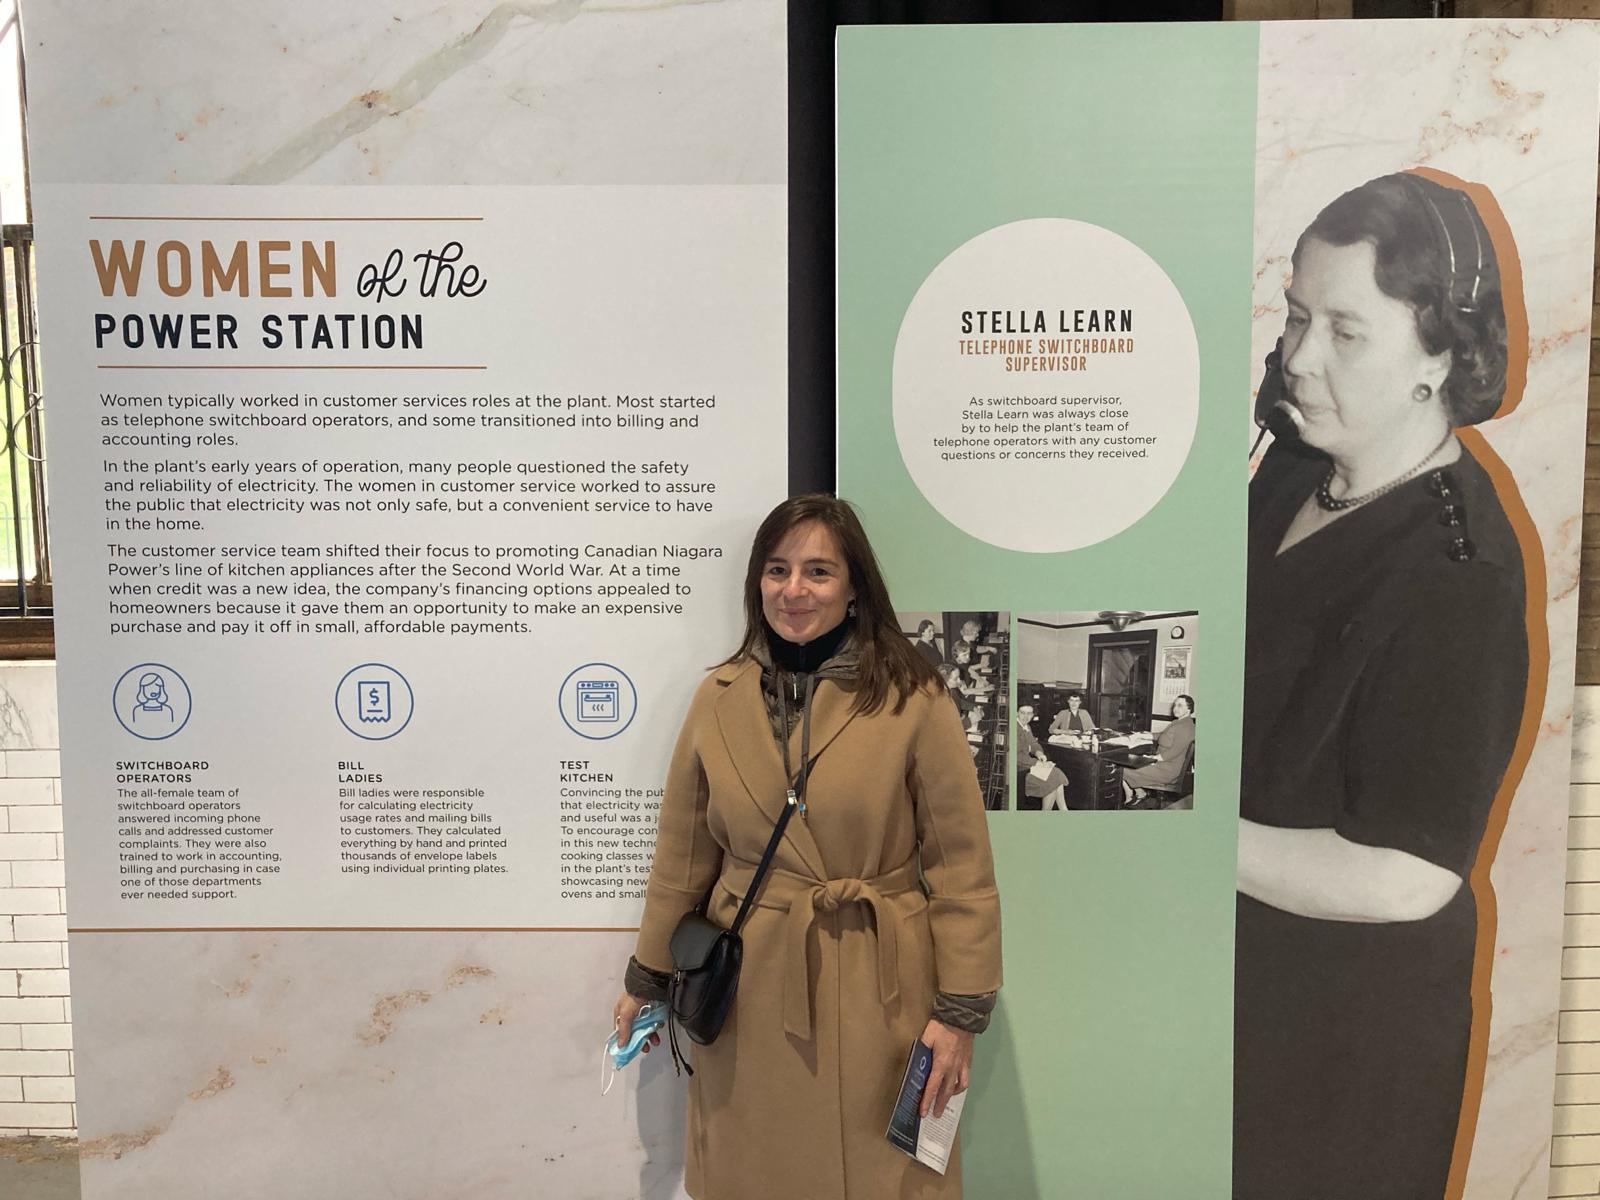 Silva with the women's history display at the Niagara hydro plant